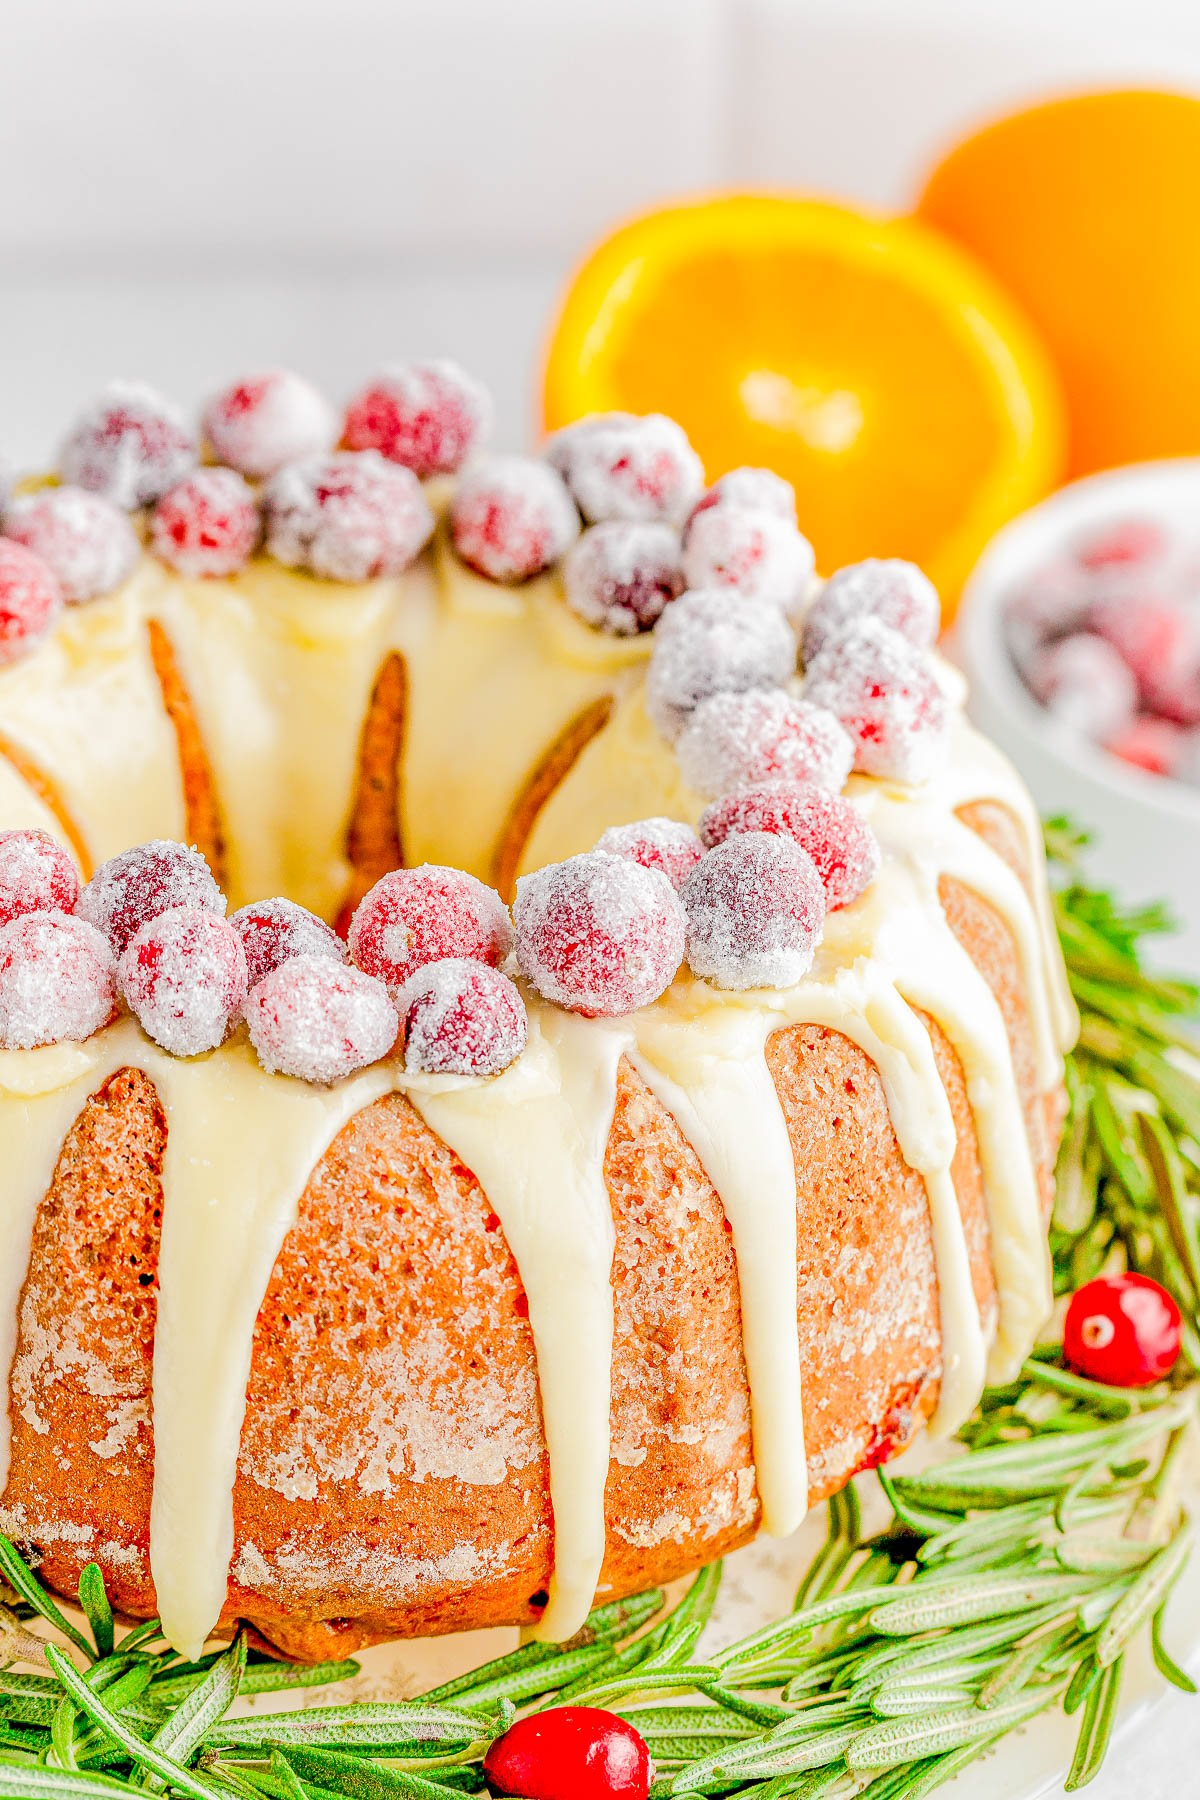 Cranberry Orange Bundt Cake — An elegant yet EASY Bundt cake recipe that only looks like you spent hours on it! This moist and tender cake is flavored with fragrant orange zest, studded with fresh cranberries, and topped with a sweet orange glaze and sugared cranberries! Learn how to make this no-mixer, festive, beautiful dessert that’s PERFECT for any holiday gathering! 